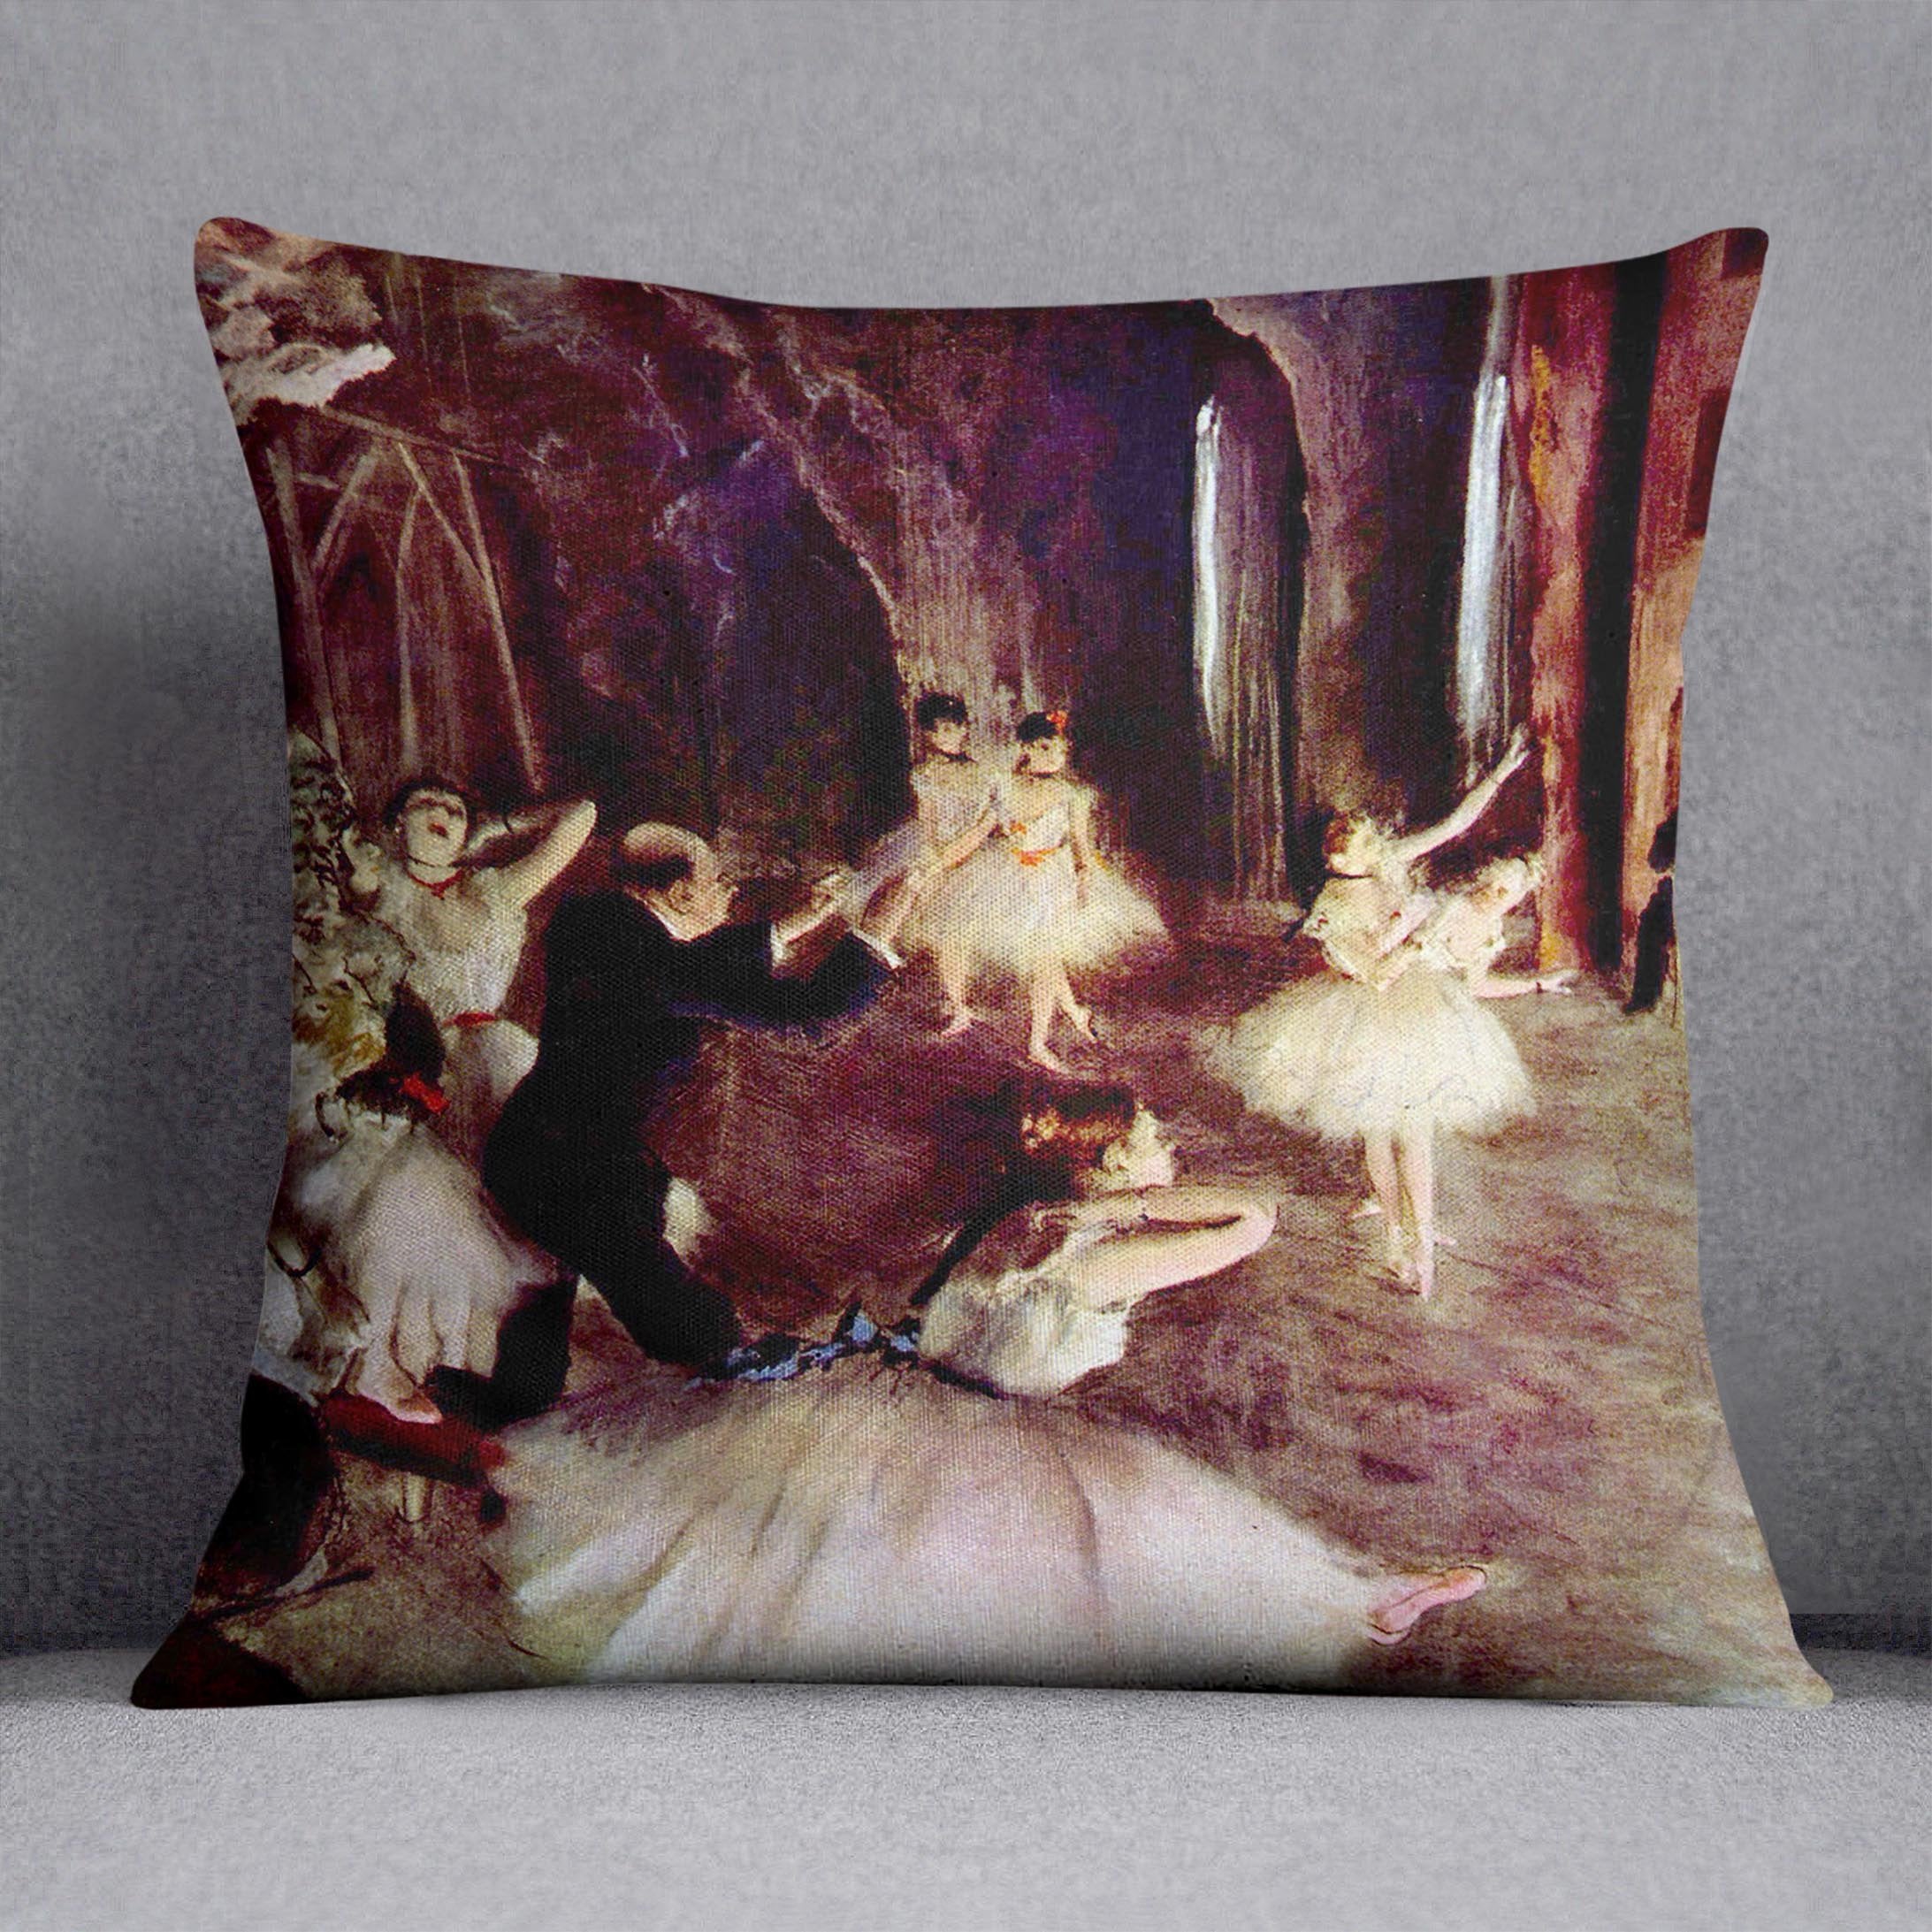 Stage trial by Degas Cushion